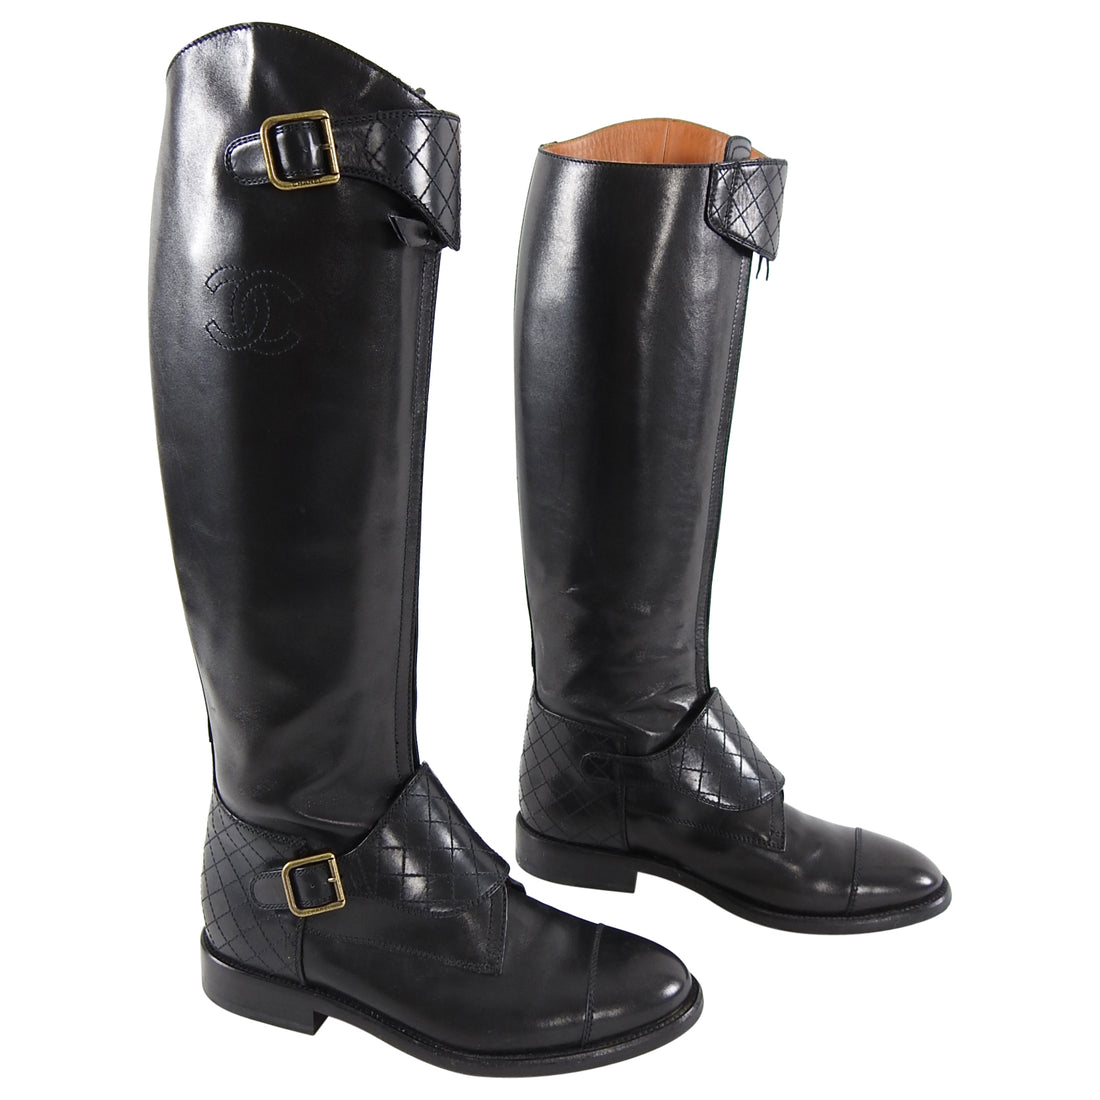 CHANEL  Shoes  Reduced Chanel Riding Boots Black Leather  Poshmark